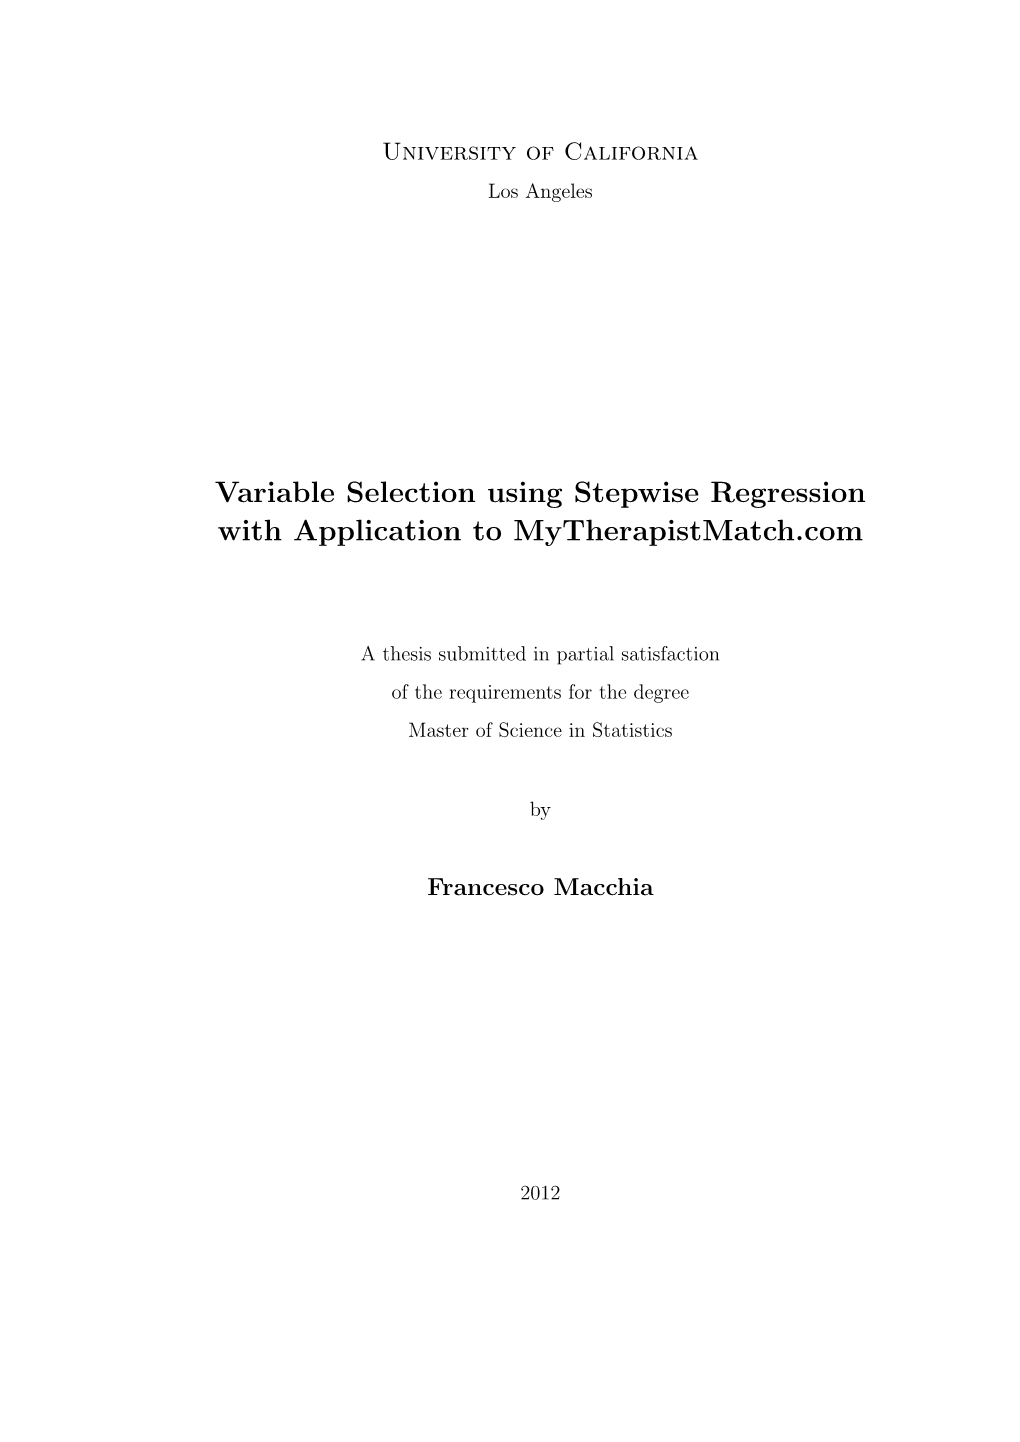 Variable Selection Using Stepwise Regression with Application to Mytherapistmatch.Com